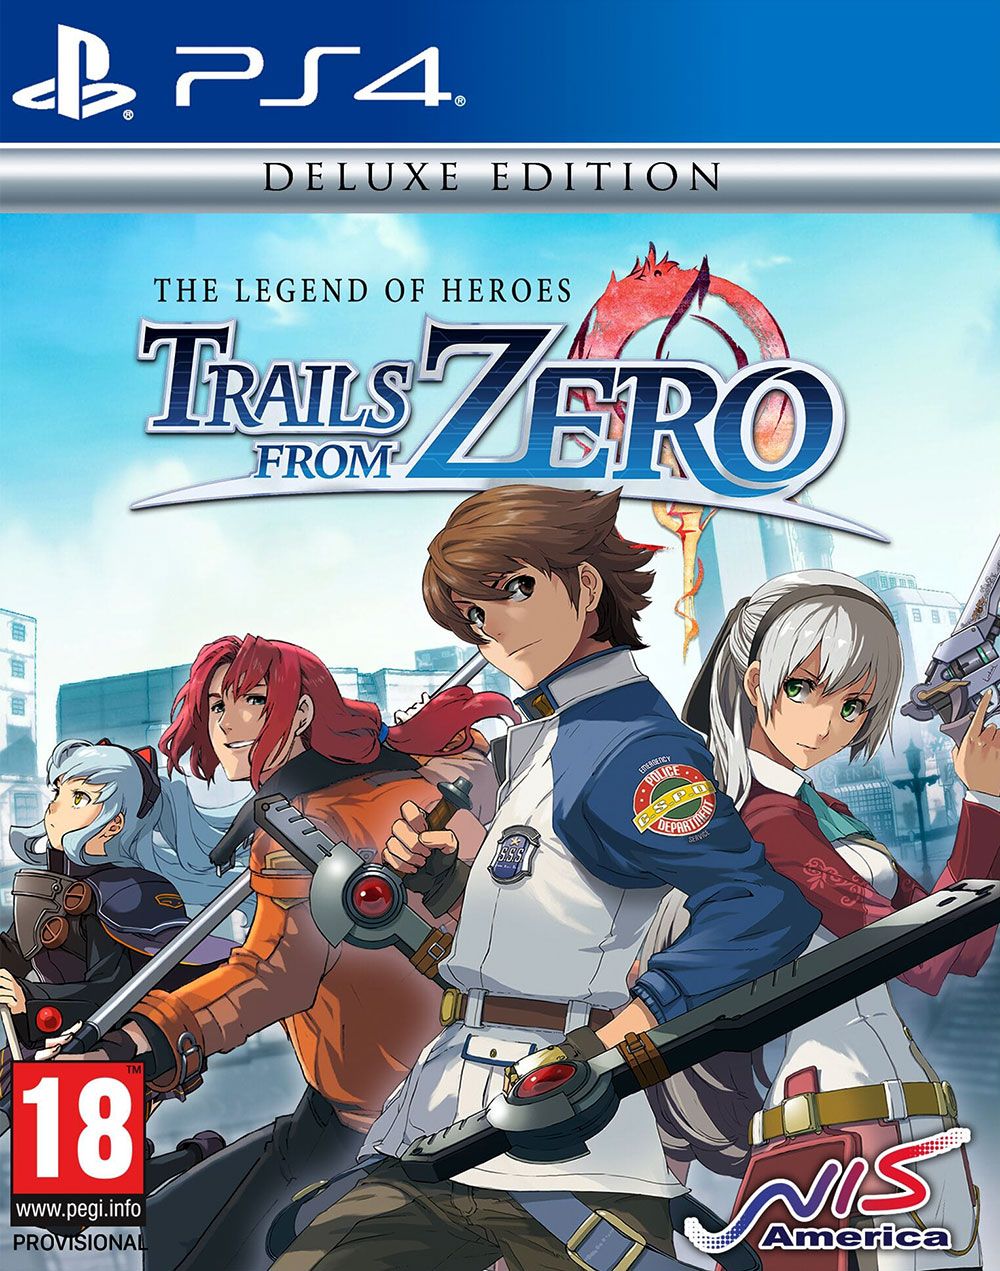 Legend of Heroes, The: Trails from Zero - Deluxe Edition (PS4) | PlayStation 4